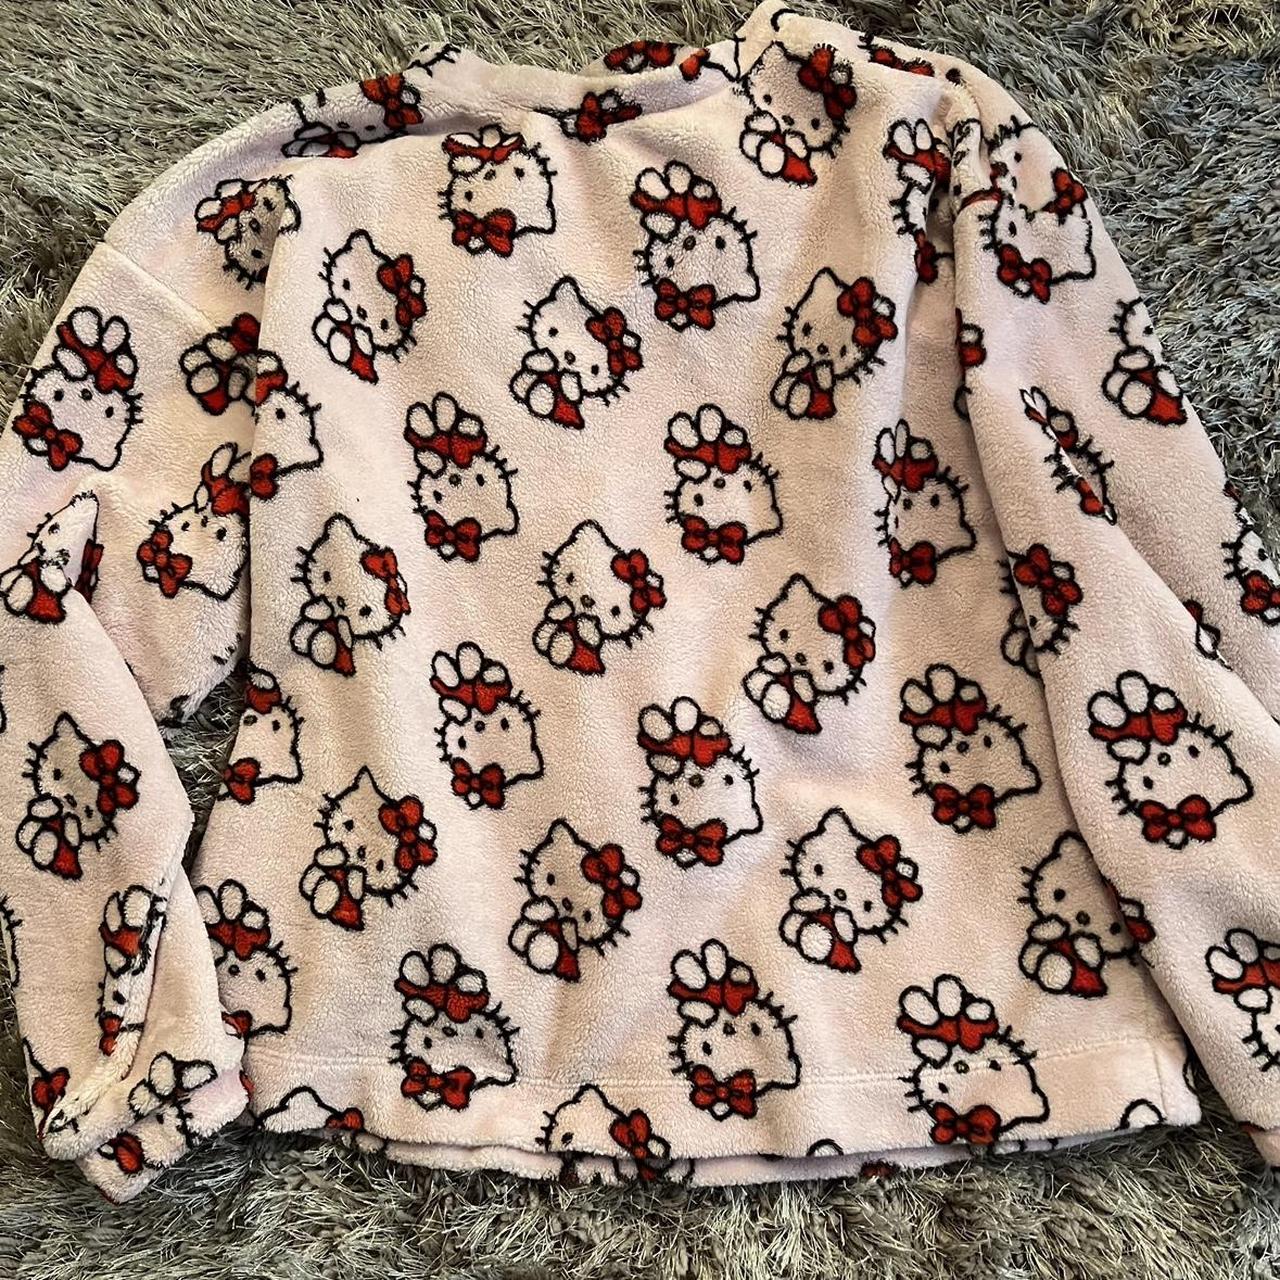 Hello Kitty Sold only in - Depop